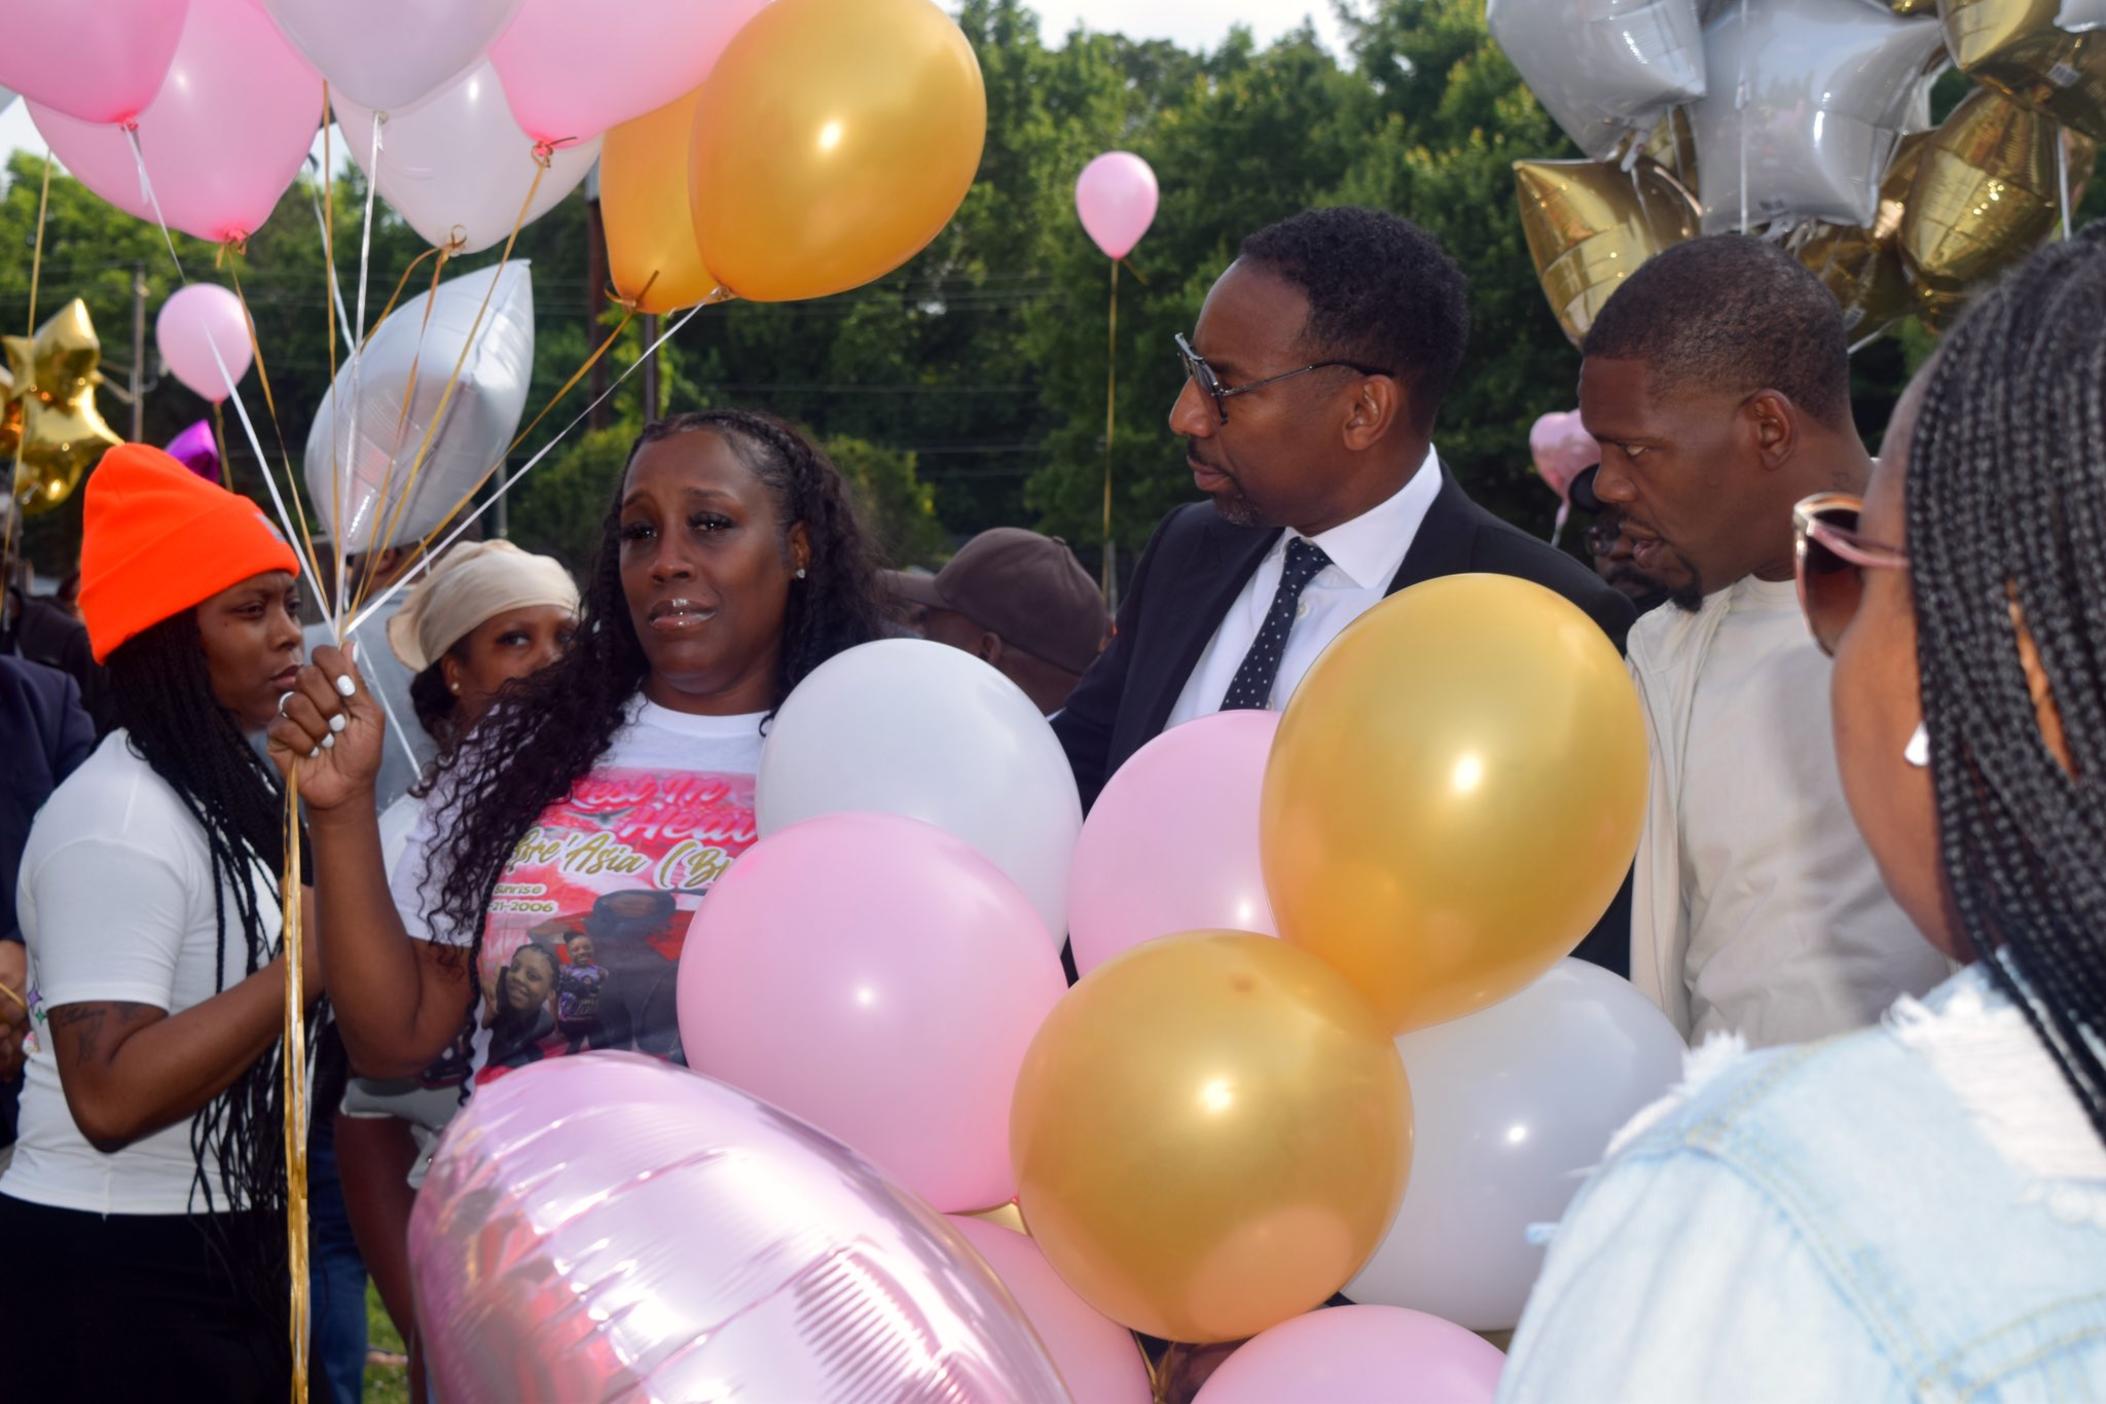 Nicole Williams, mother of Bre'Asia Powell, who died after being shot at a gathering on the grounds of Benjamin E. Mays High School Sunday, holds balloons a May 31 balloon release in honor of her 16-year-old daughter. Atlanta Mayor Andre Dickens (center) spoke at the event.